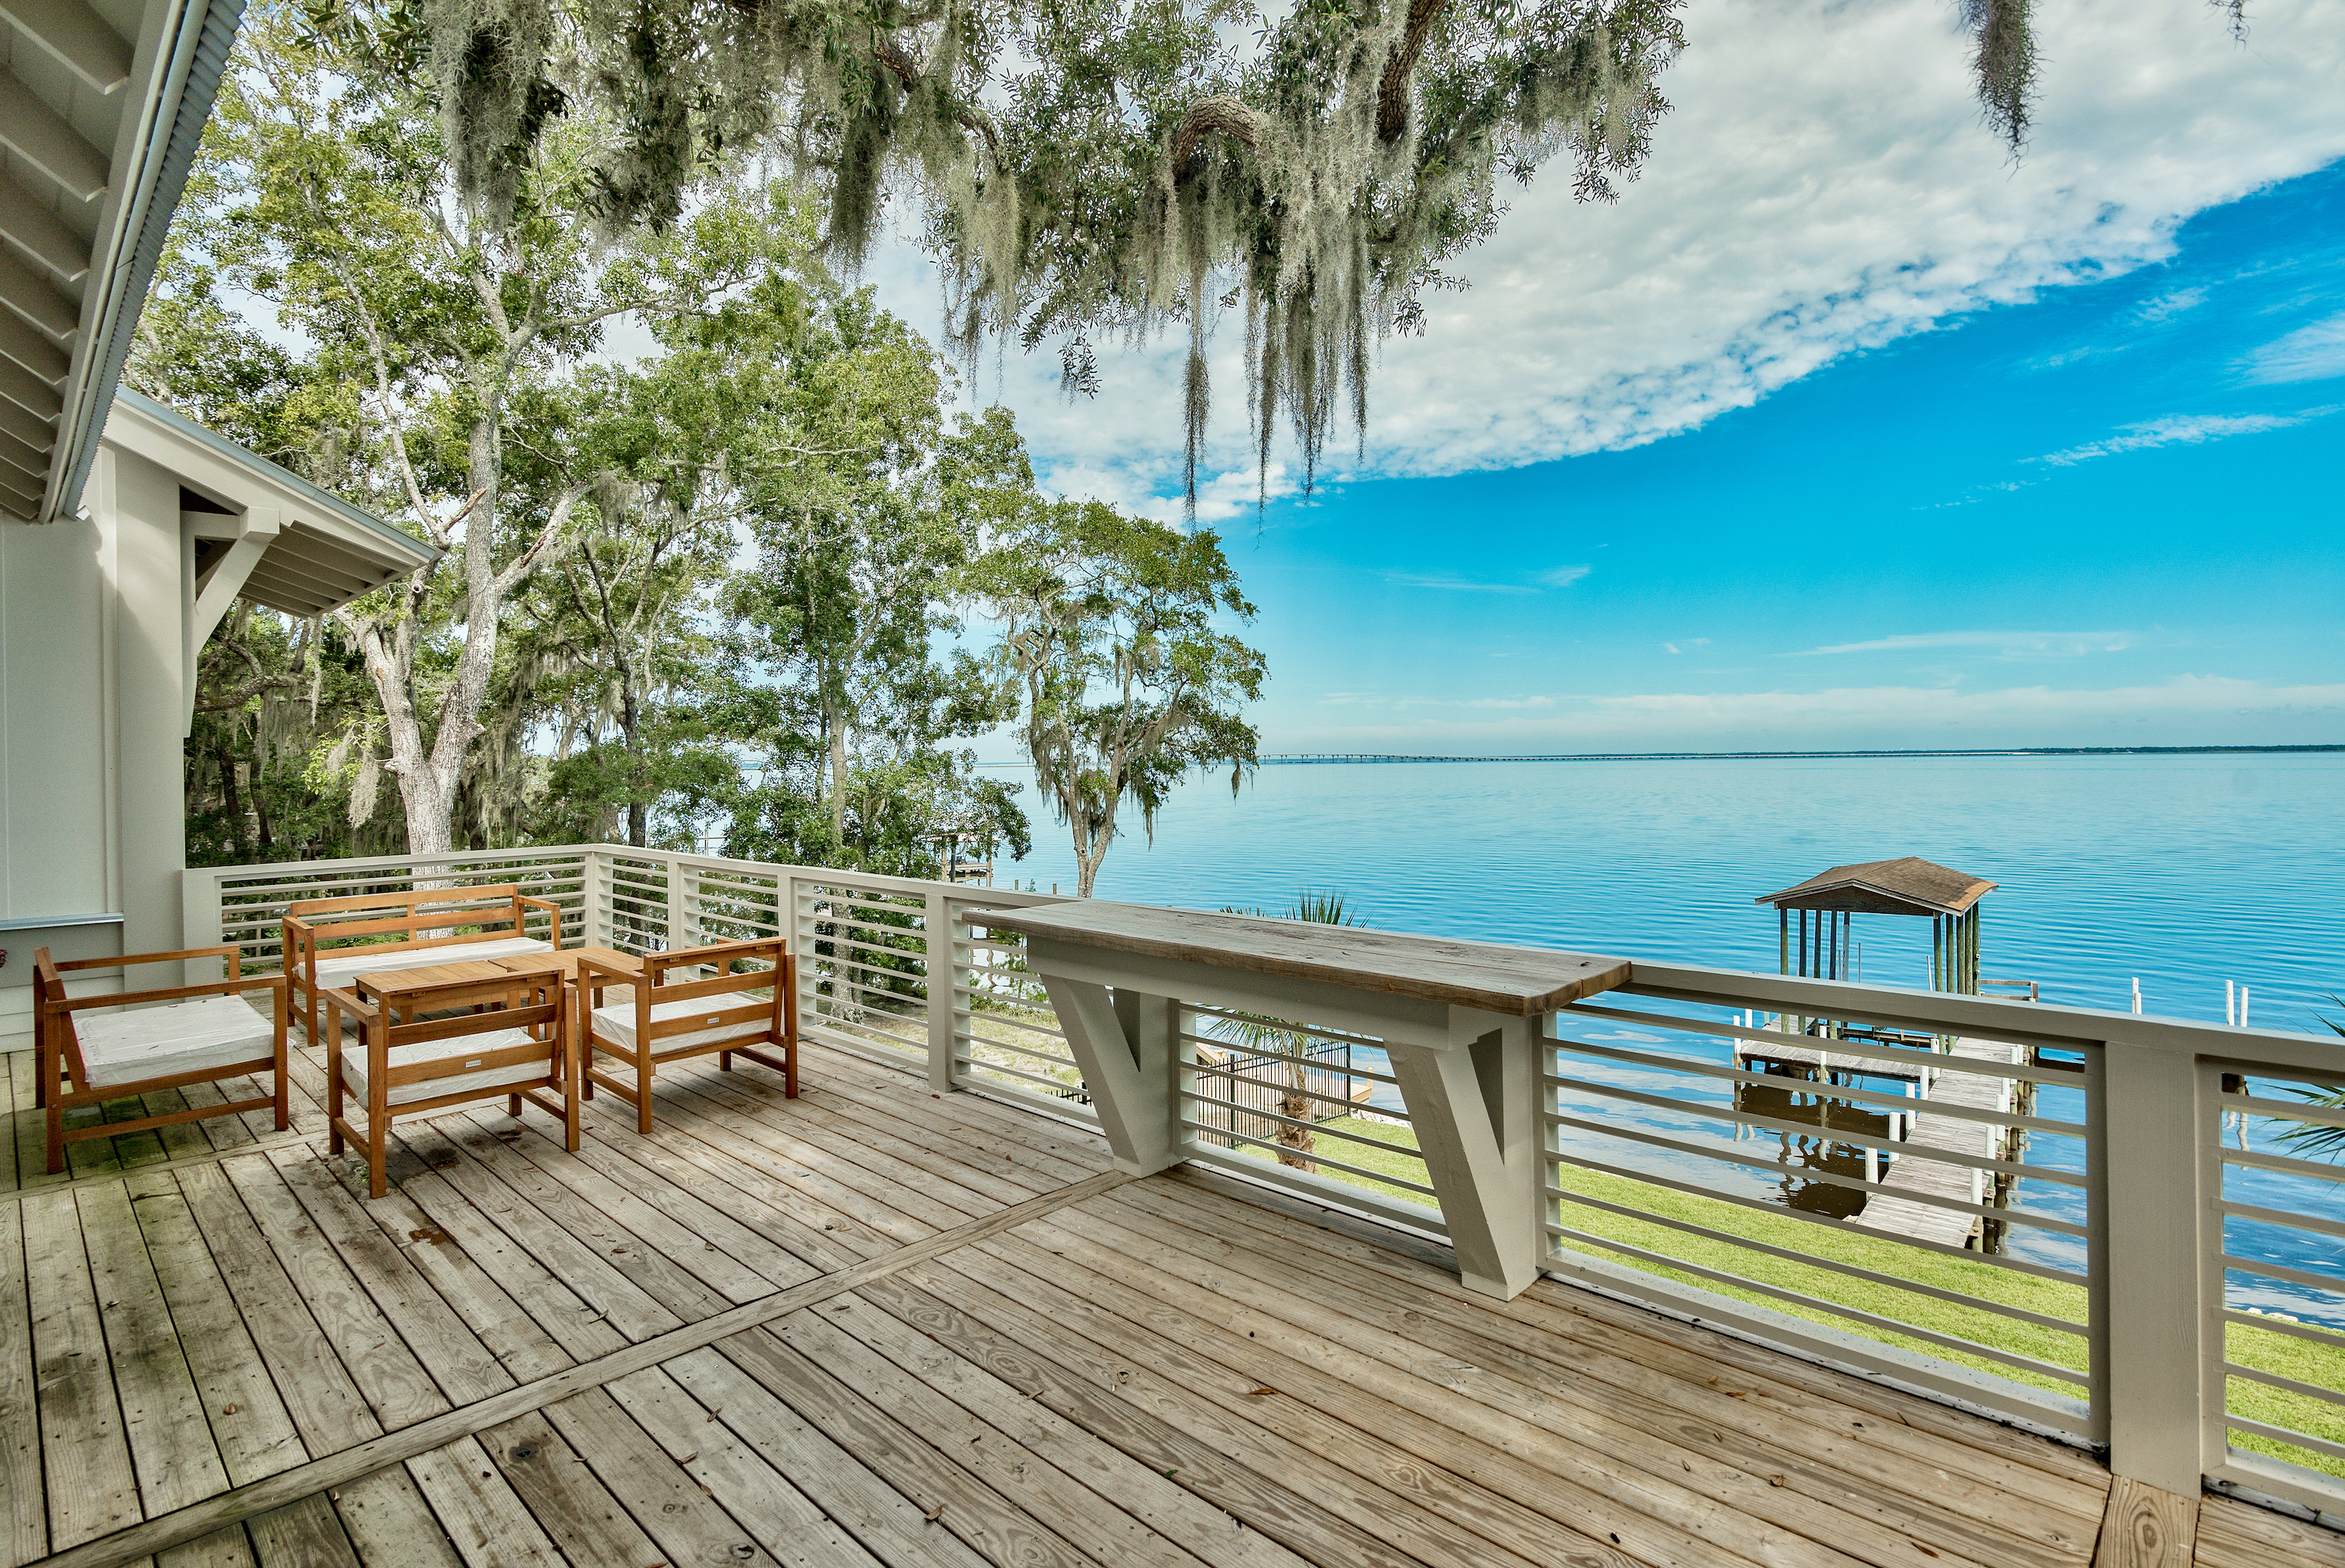 A view of the bay from the private deck of a bay front home beneath moss covered oak trees